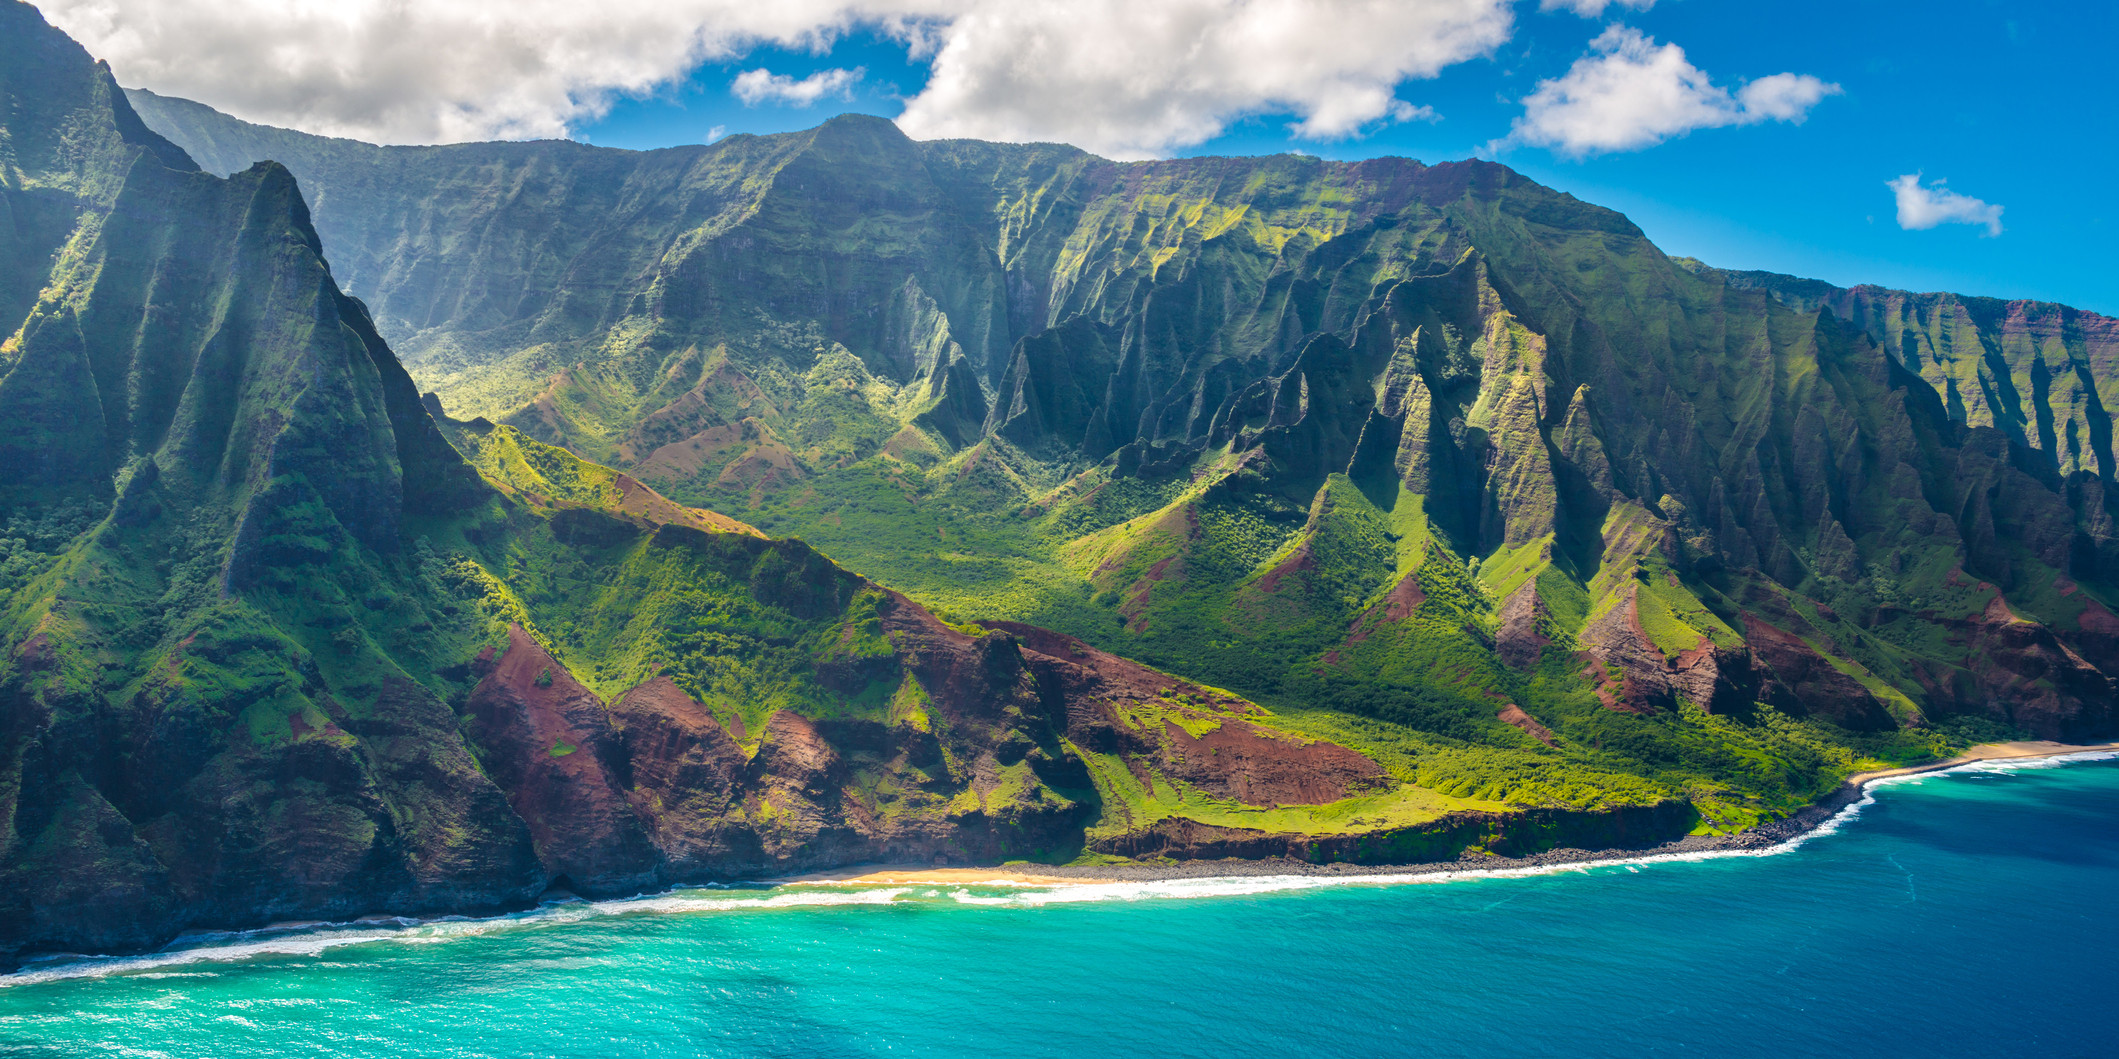 6 Best Islands to Visit in Hawaii for First-Time Visitors